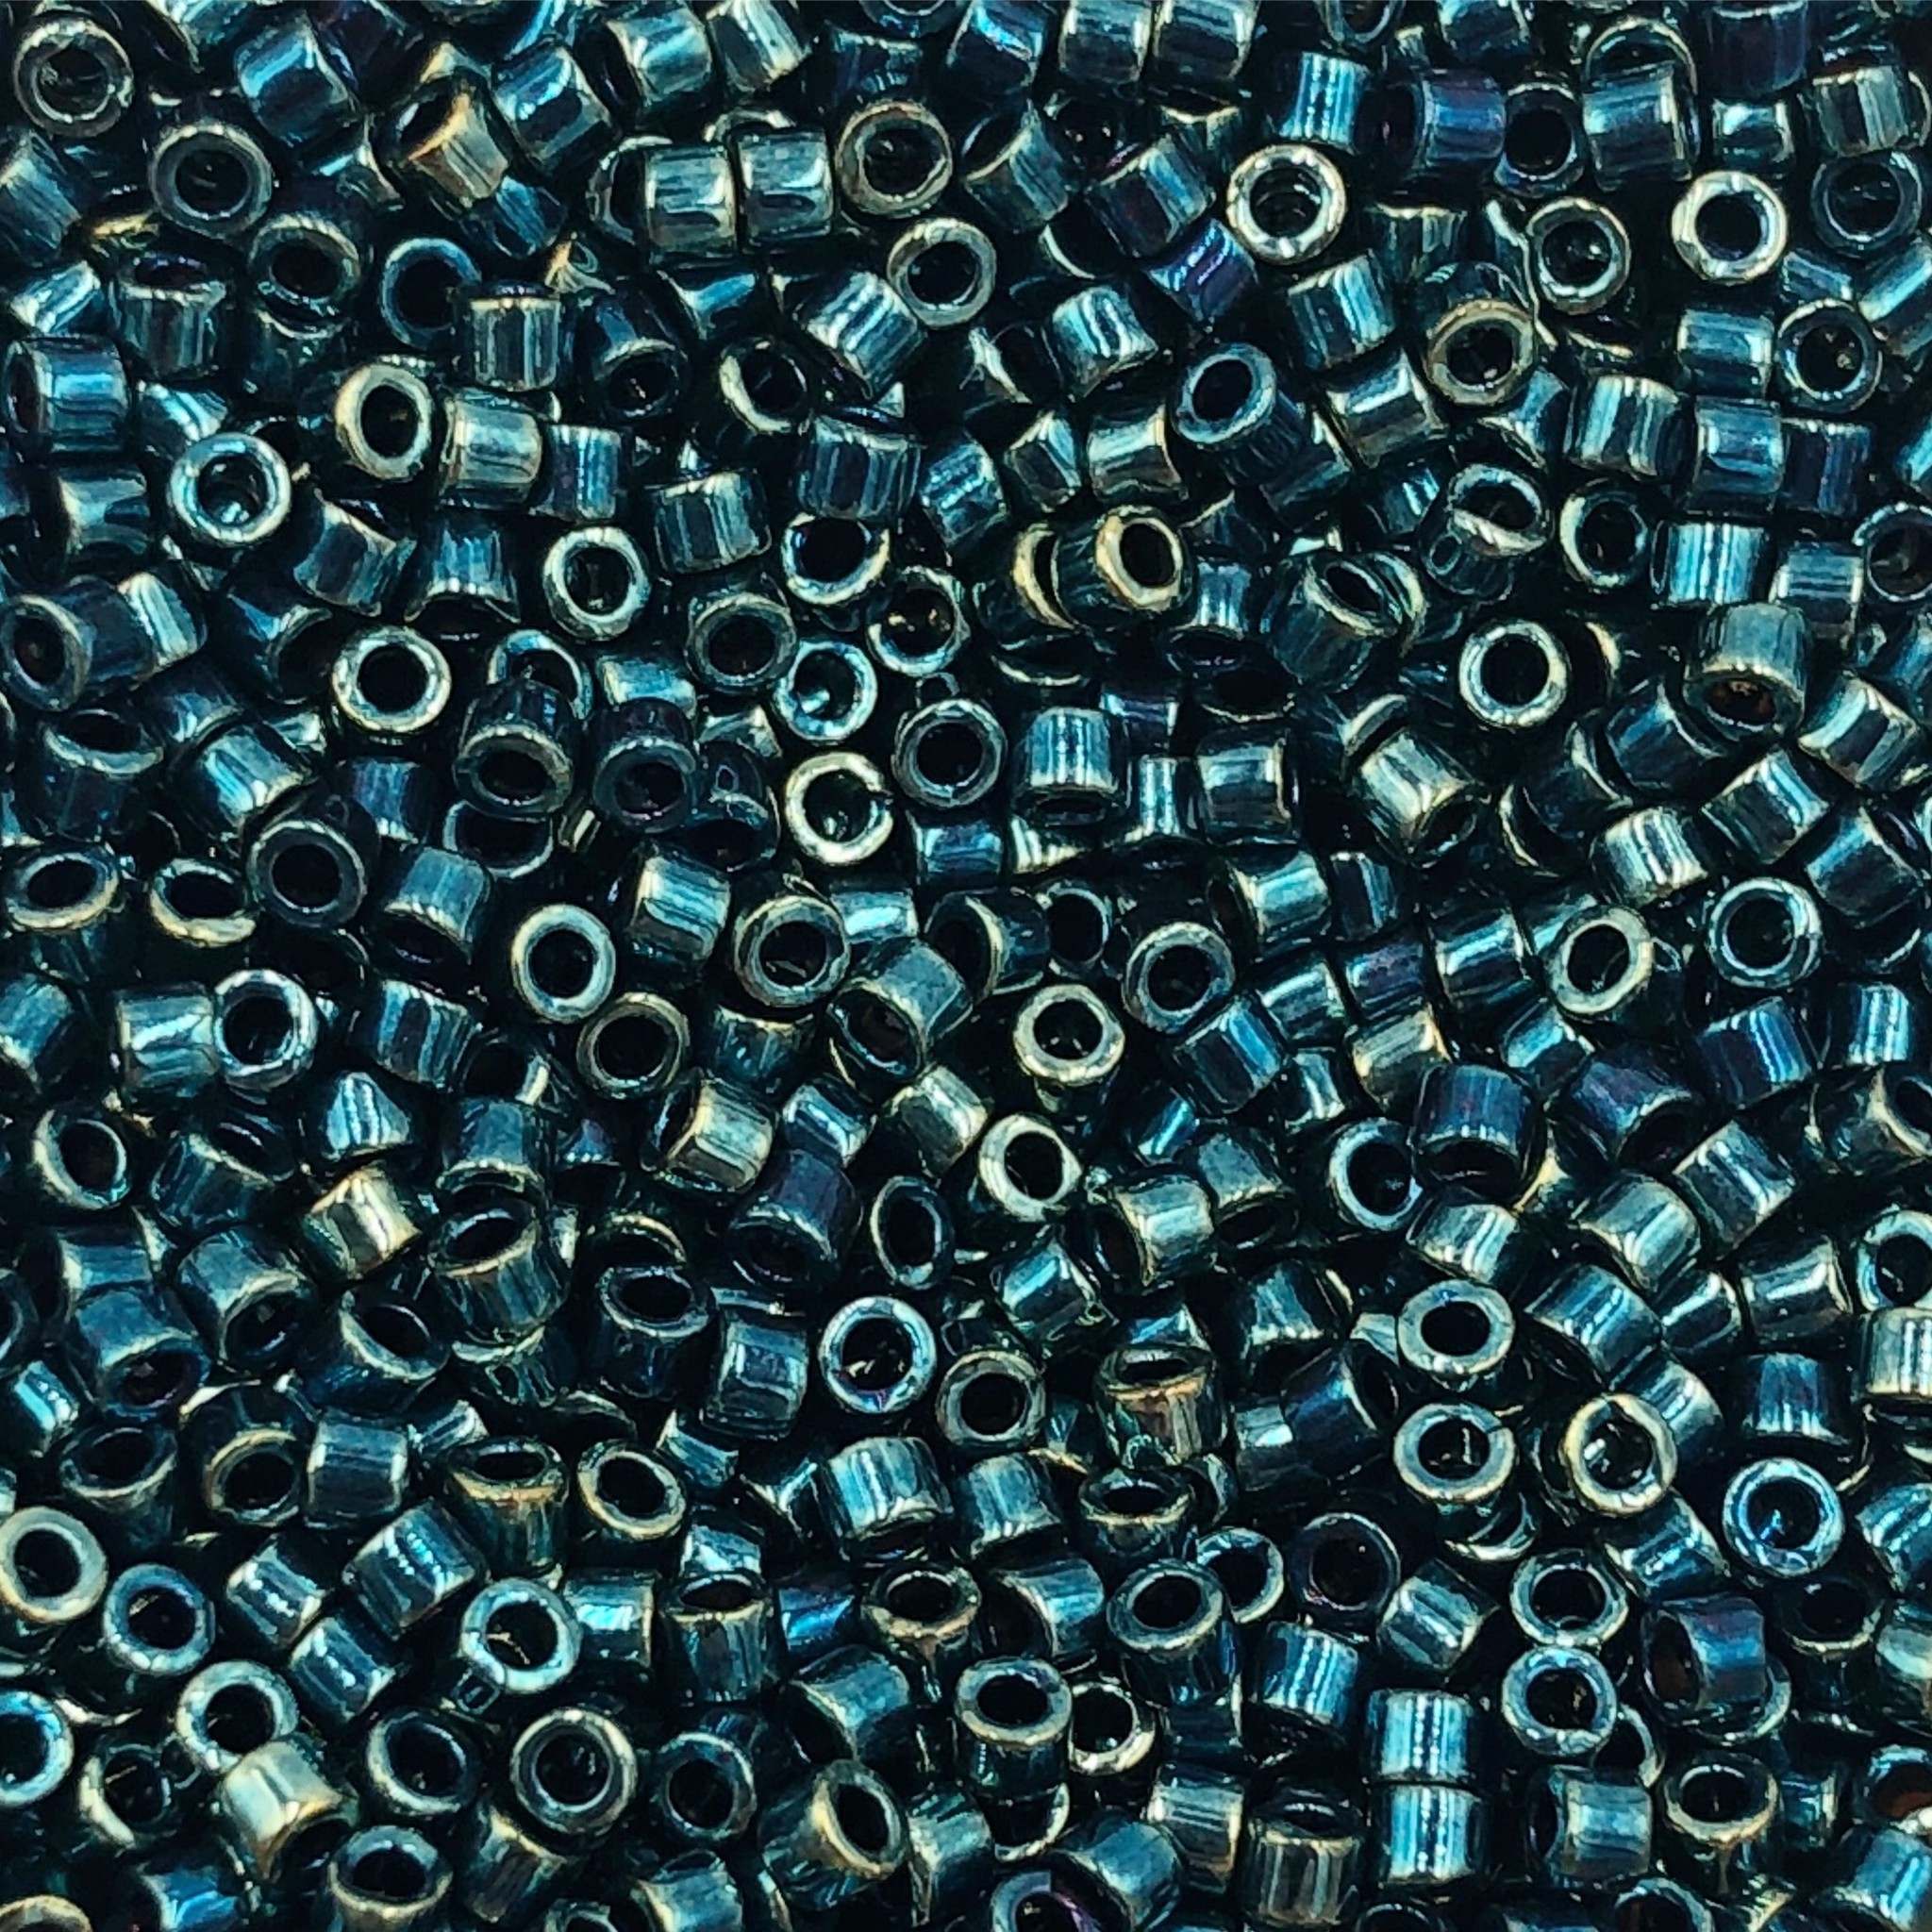 Opaque Blue Violet Delicas, Size 11 Delica Seed Beads